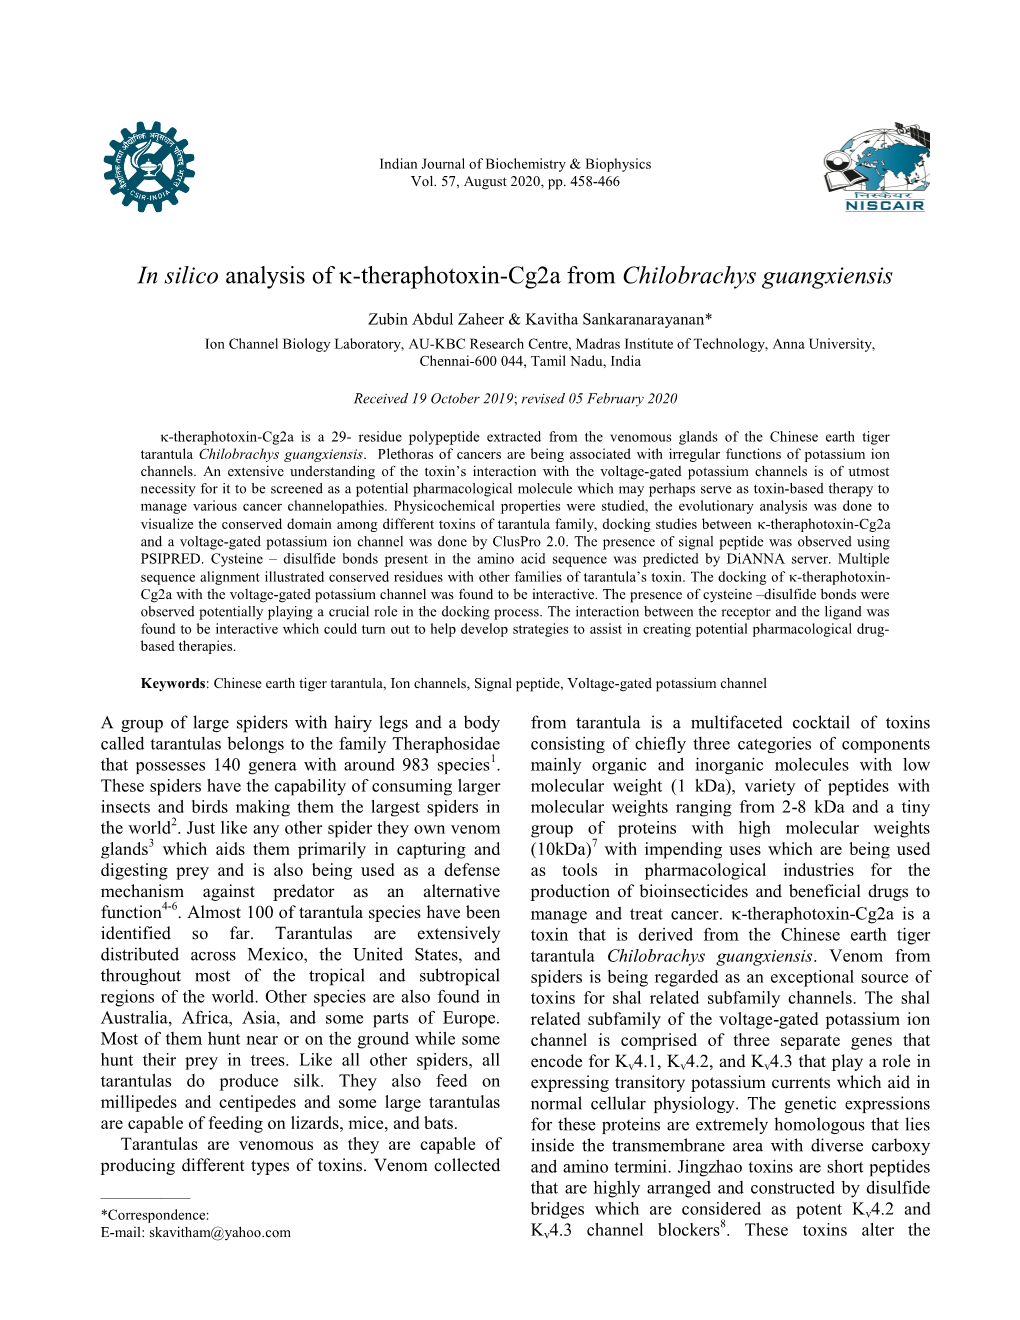 In Silico Analysis of Κ-Theraphotoxin-Cg2a from Chilobrachys Guangxiensis